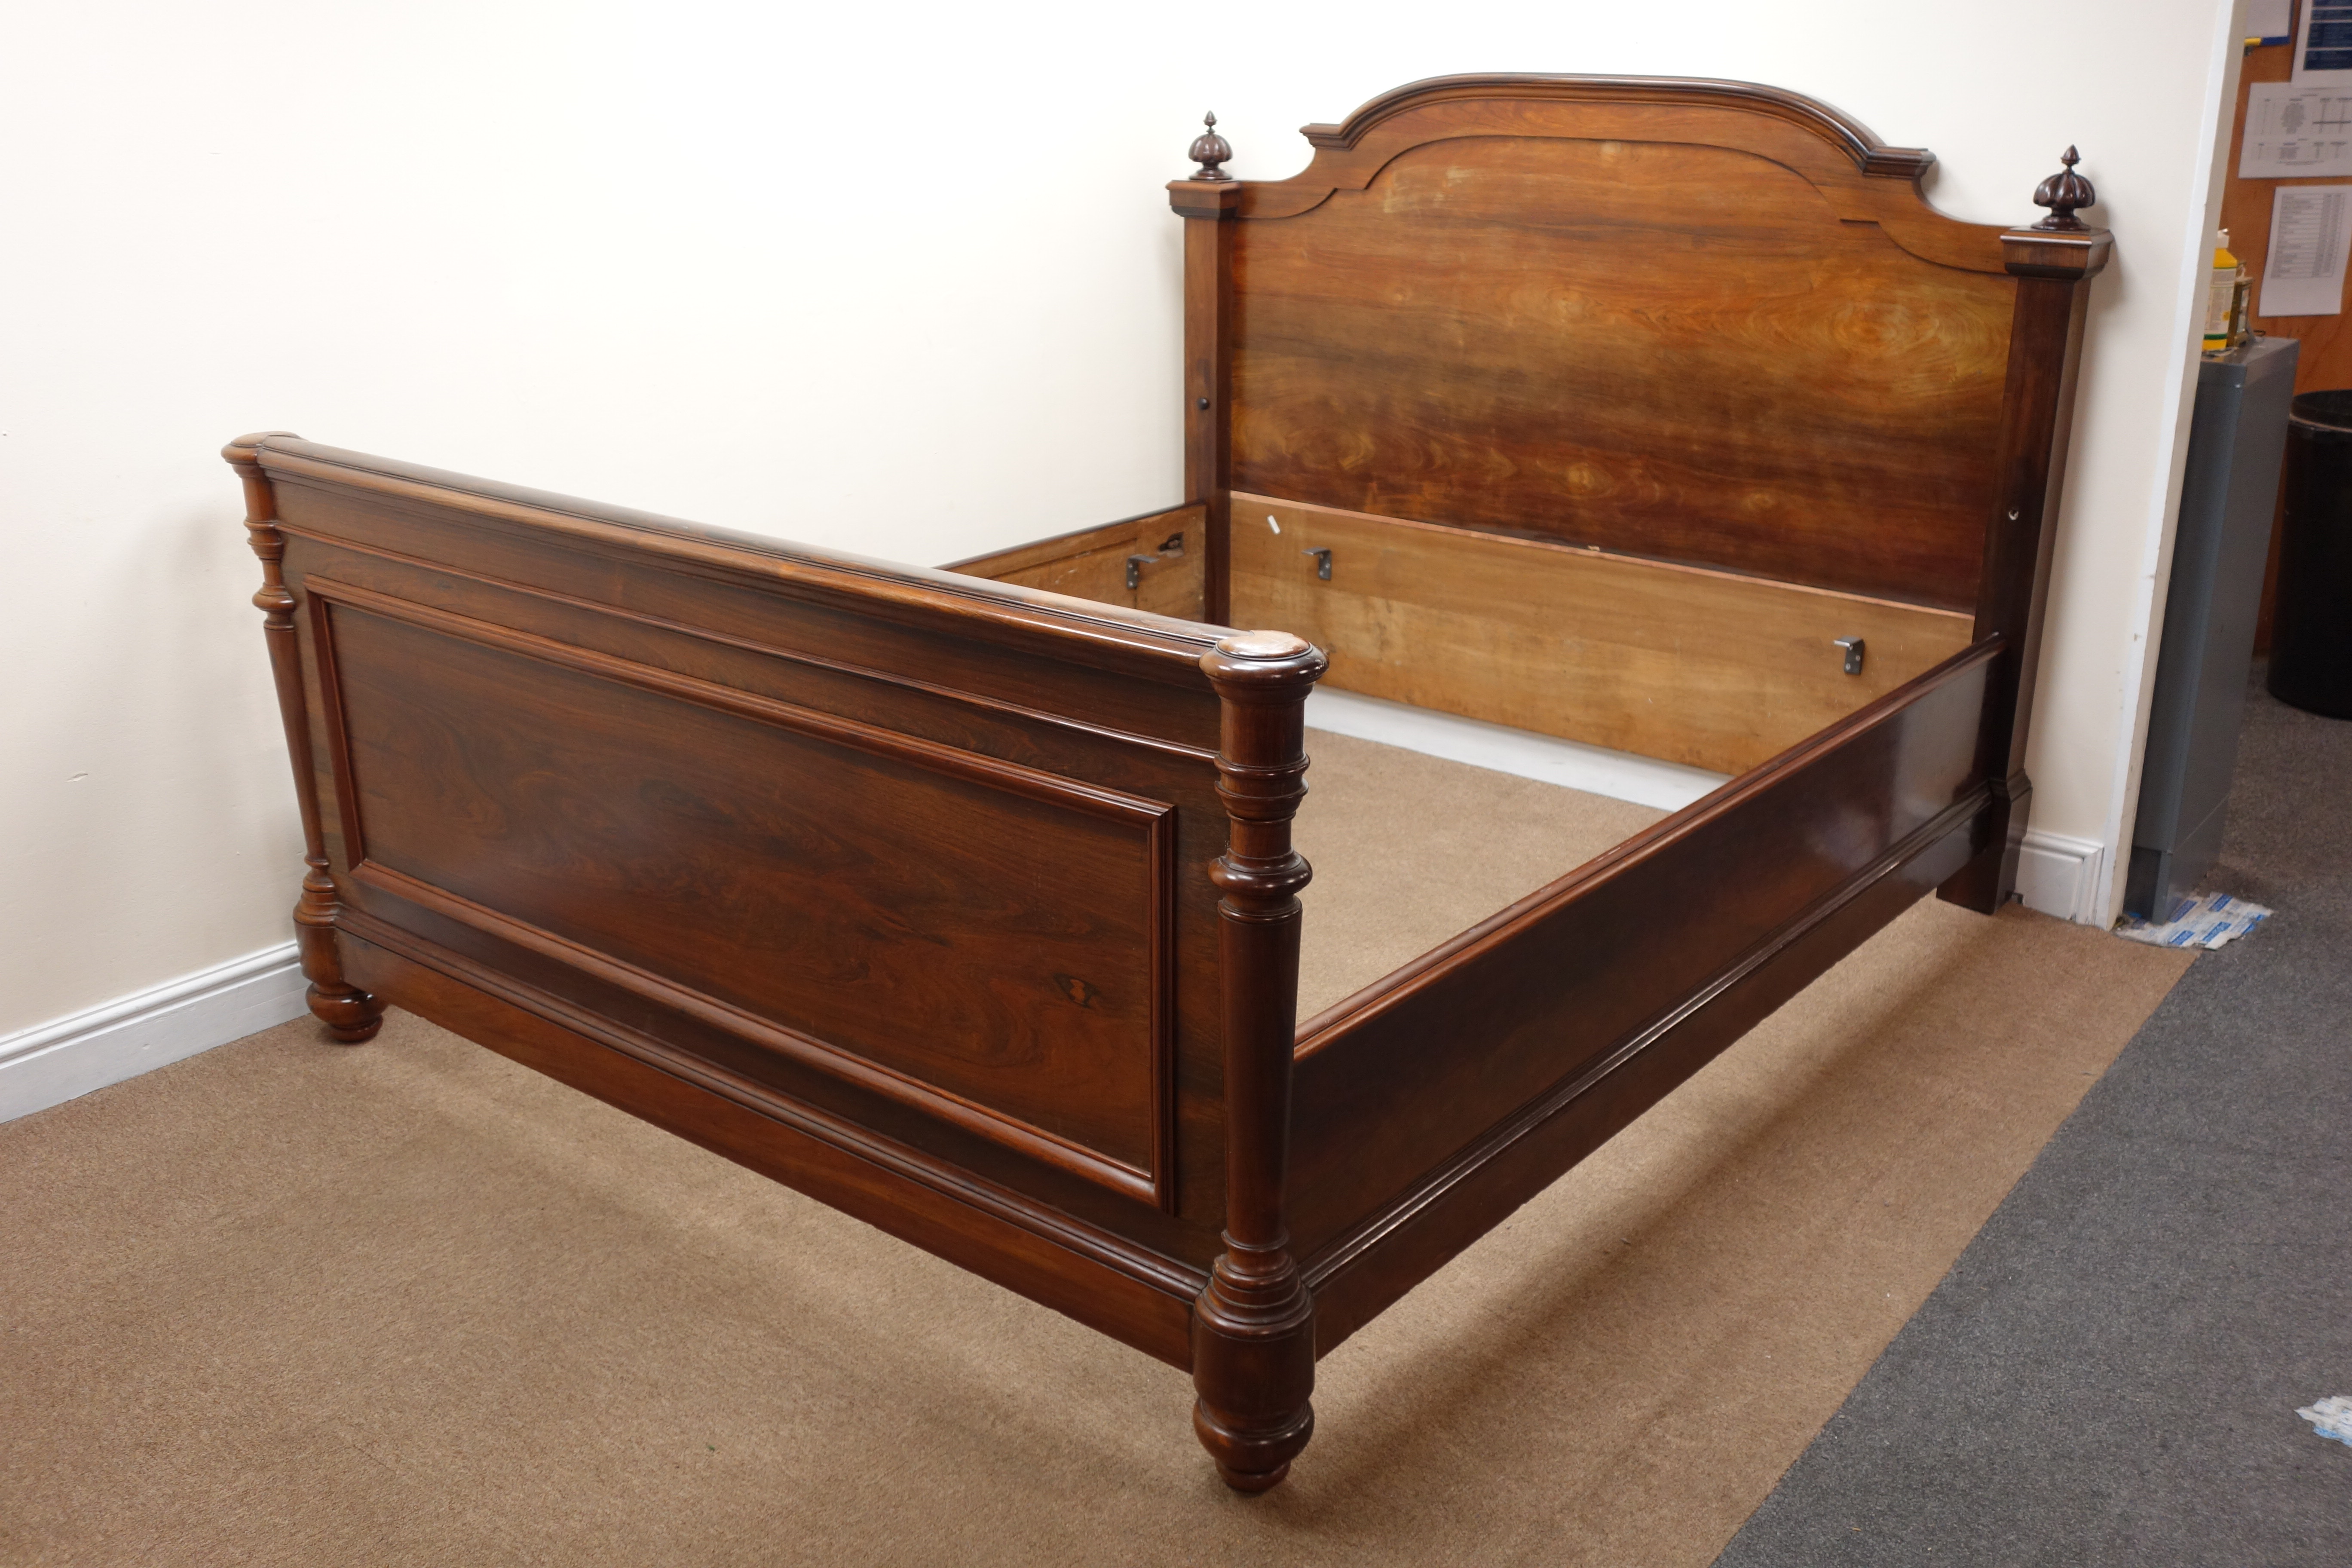 19th century French rosewood double bed stead, the stepped arched headboard with lobed finials, - Image 3 of 9